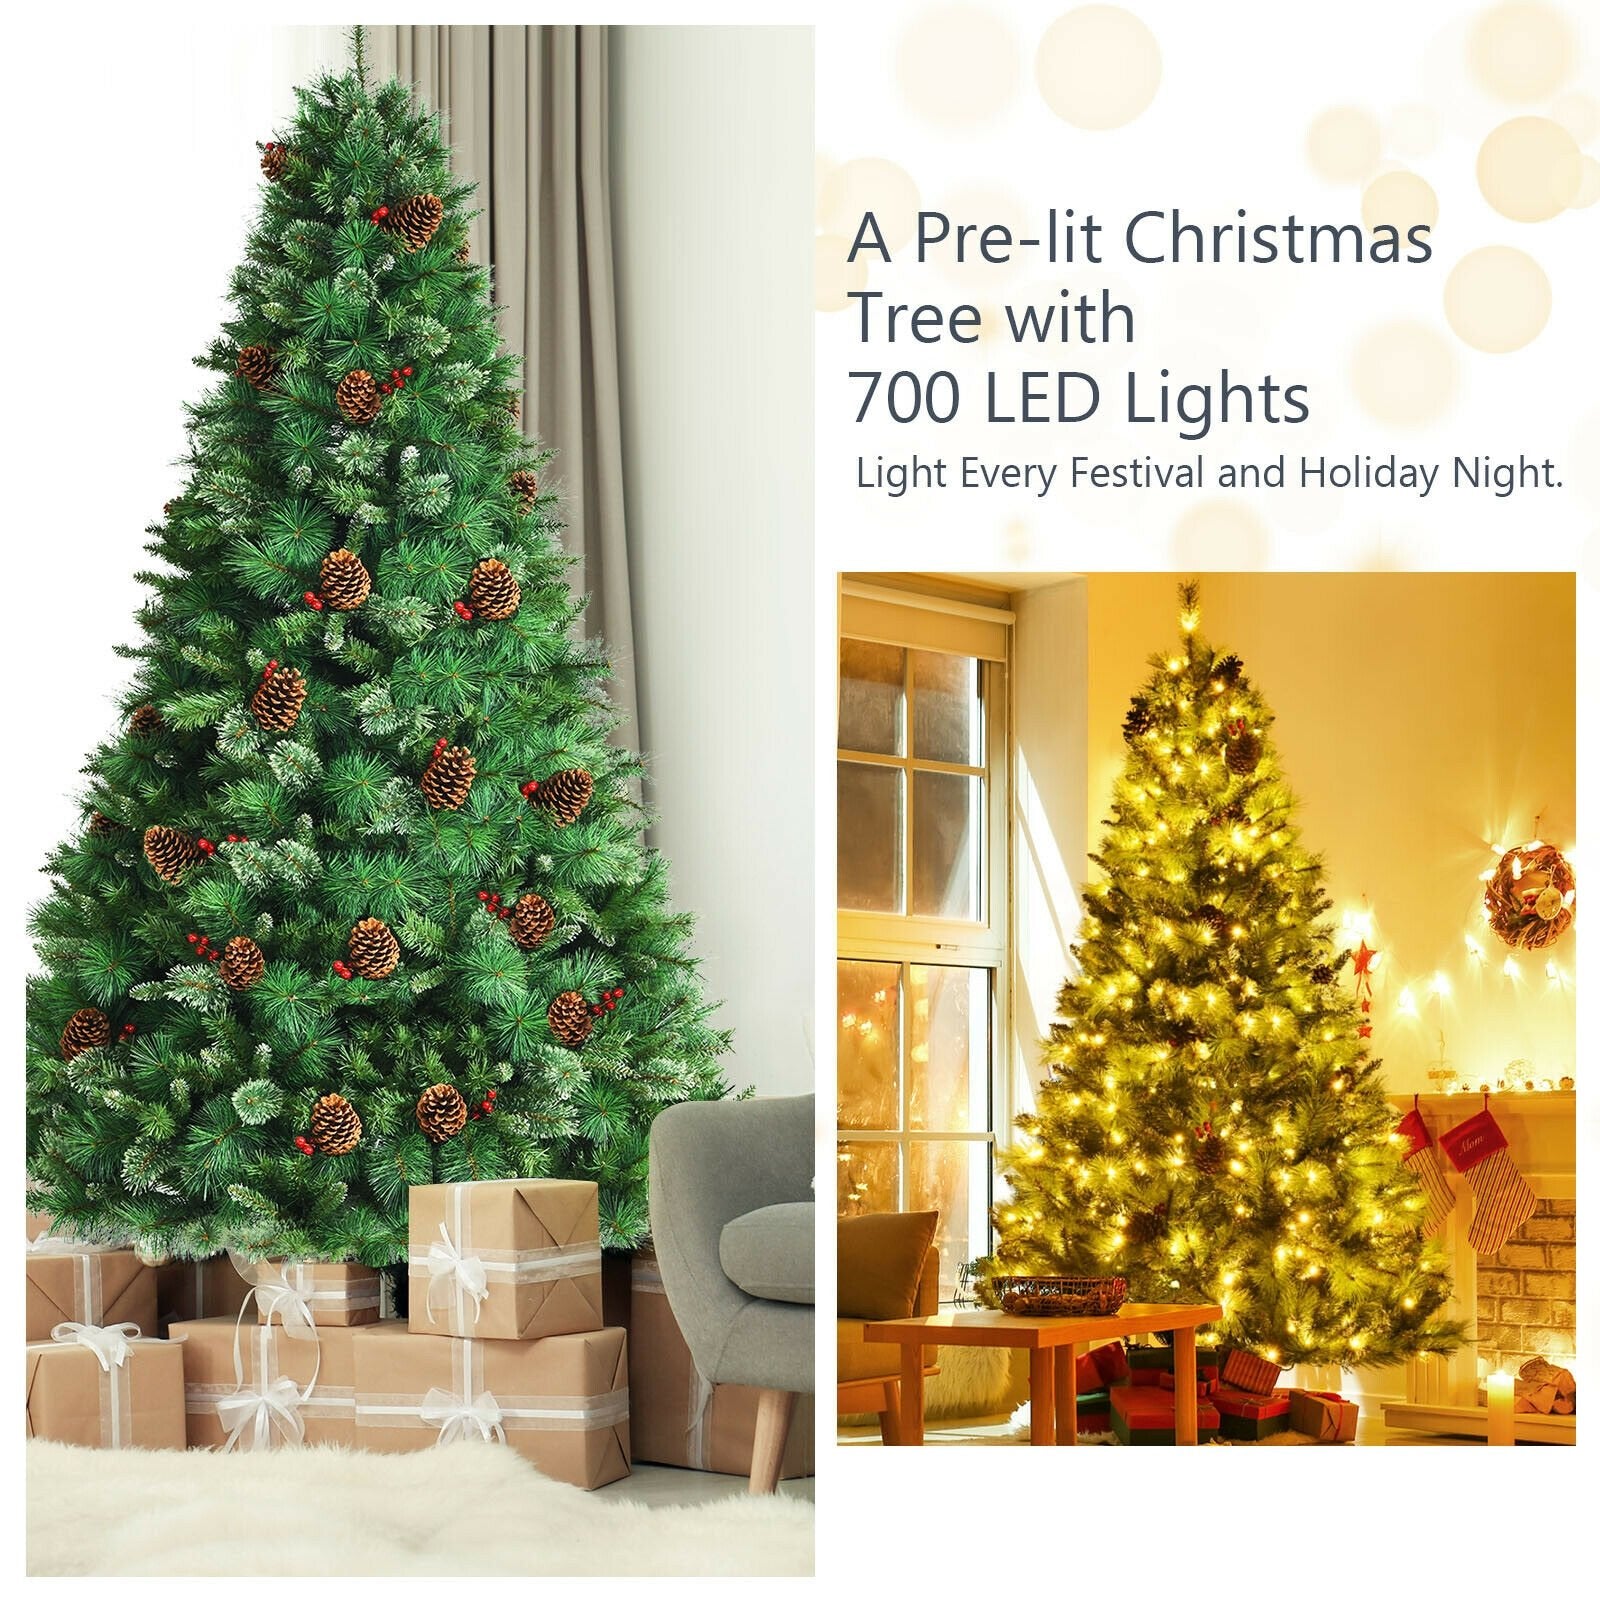 Pre-lit Hinged Christmas Tree with Pine Cones and Red Berries-8', Green - Gallery Canada